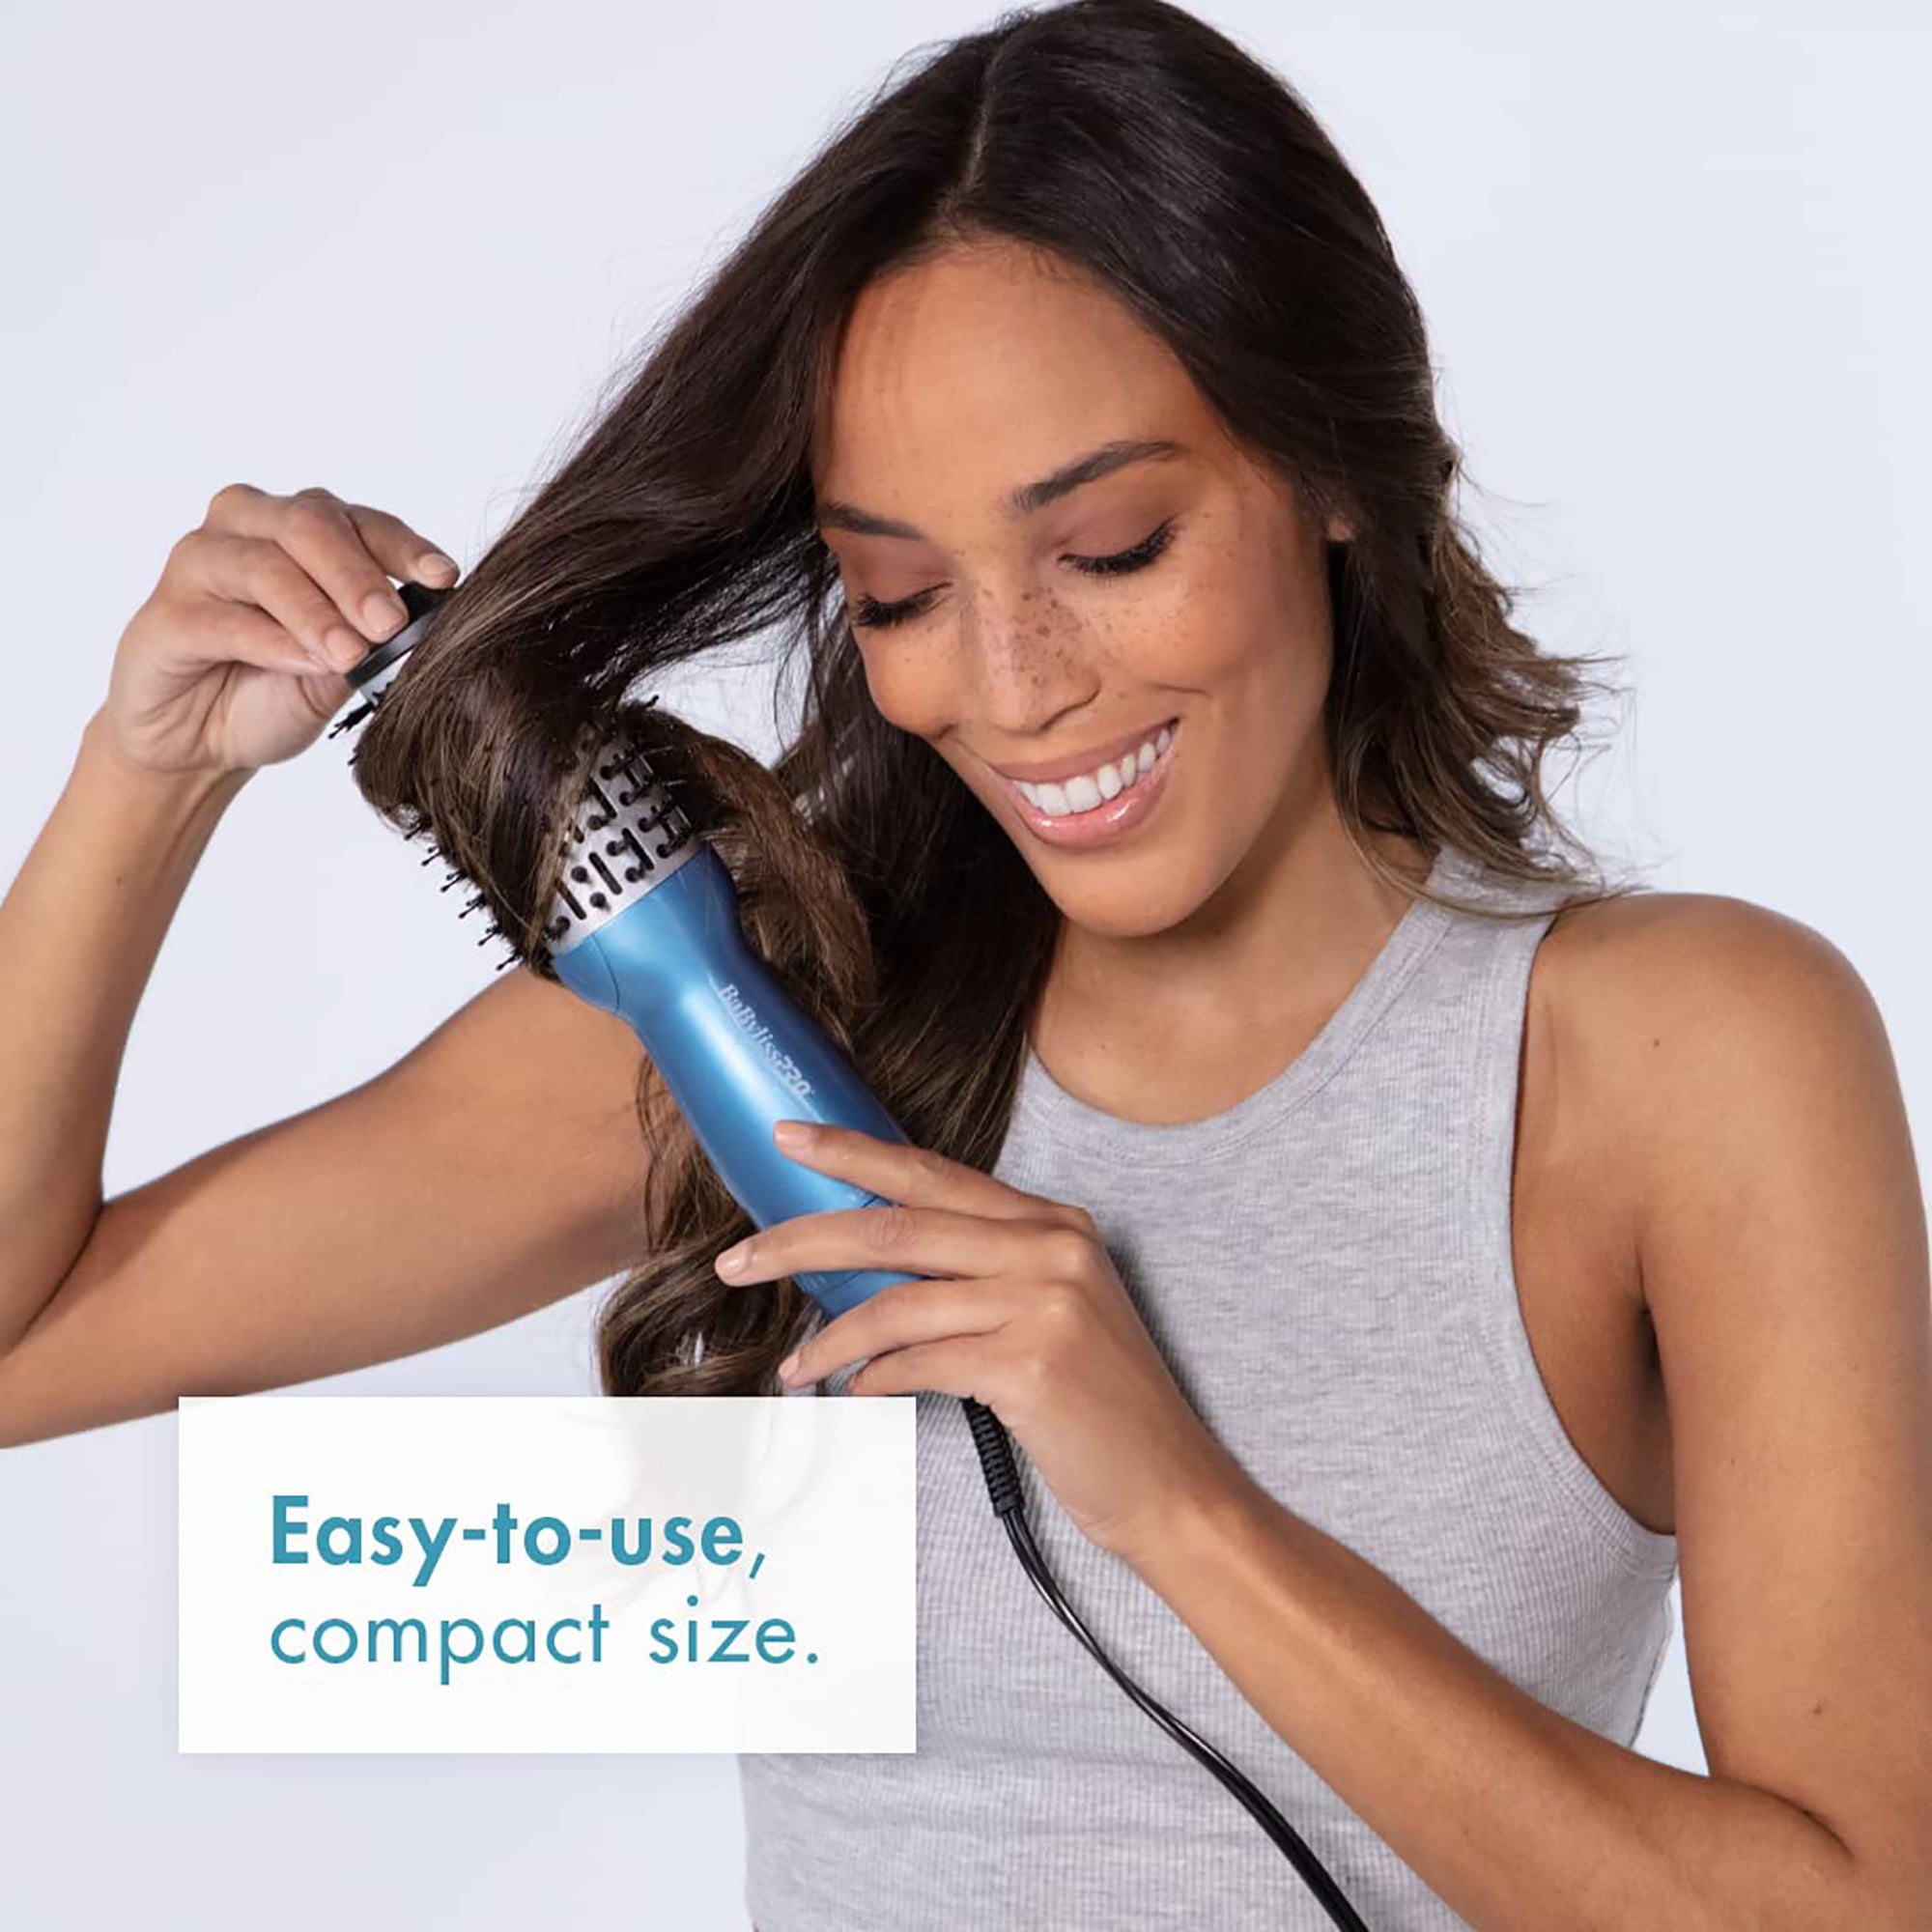  BaBylissPRO Comb Set : Beauty & Personal Care